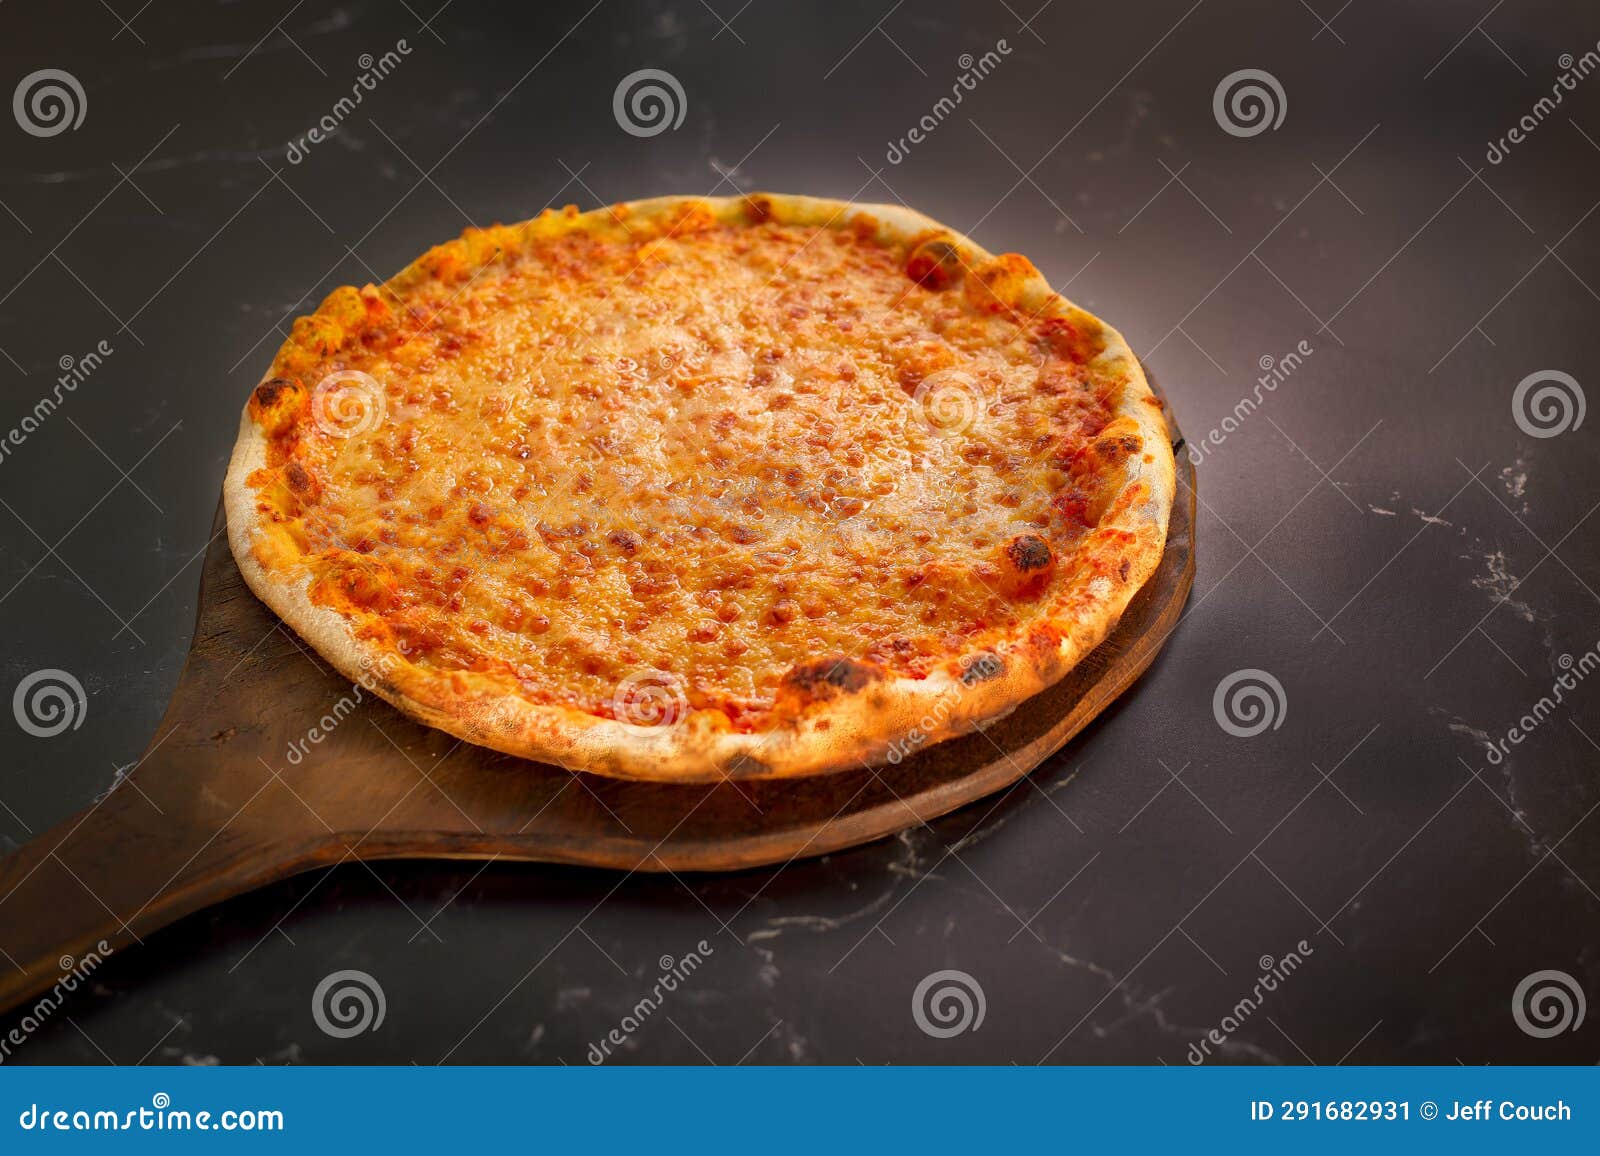 Wood Fired Cheese Pizza on Black Background Stock Image - Image of melted,  tomato: 291682931